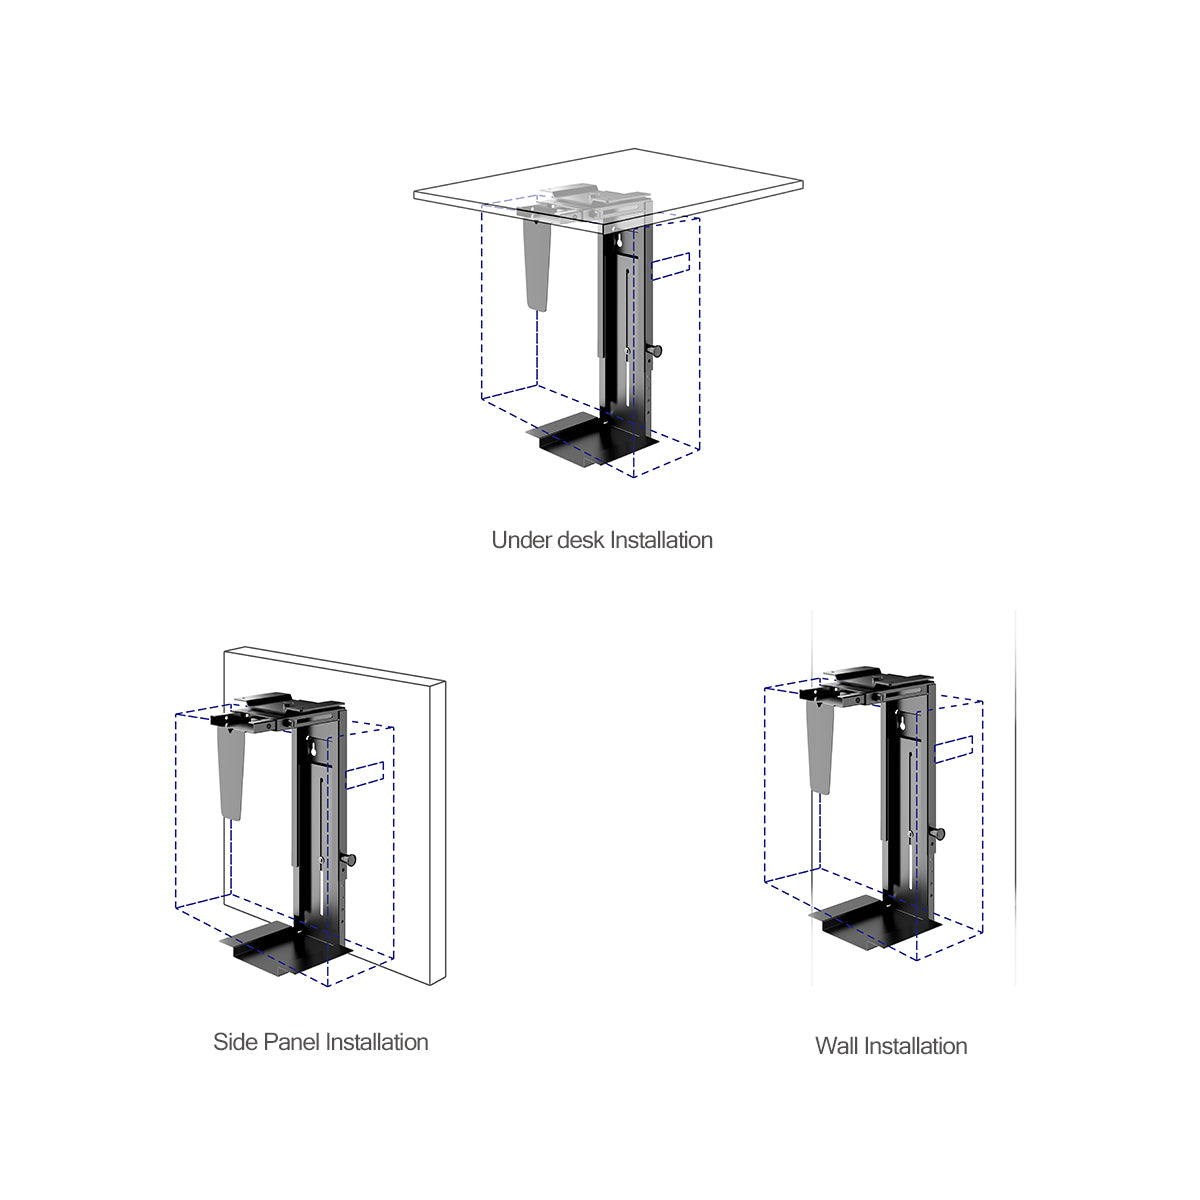 CPU holder with various installation methods, under desk installation, wall installation